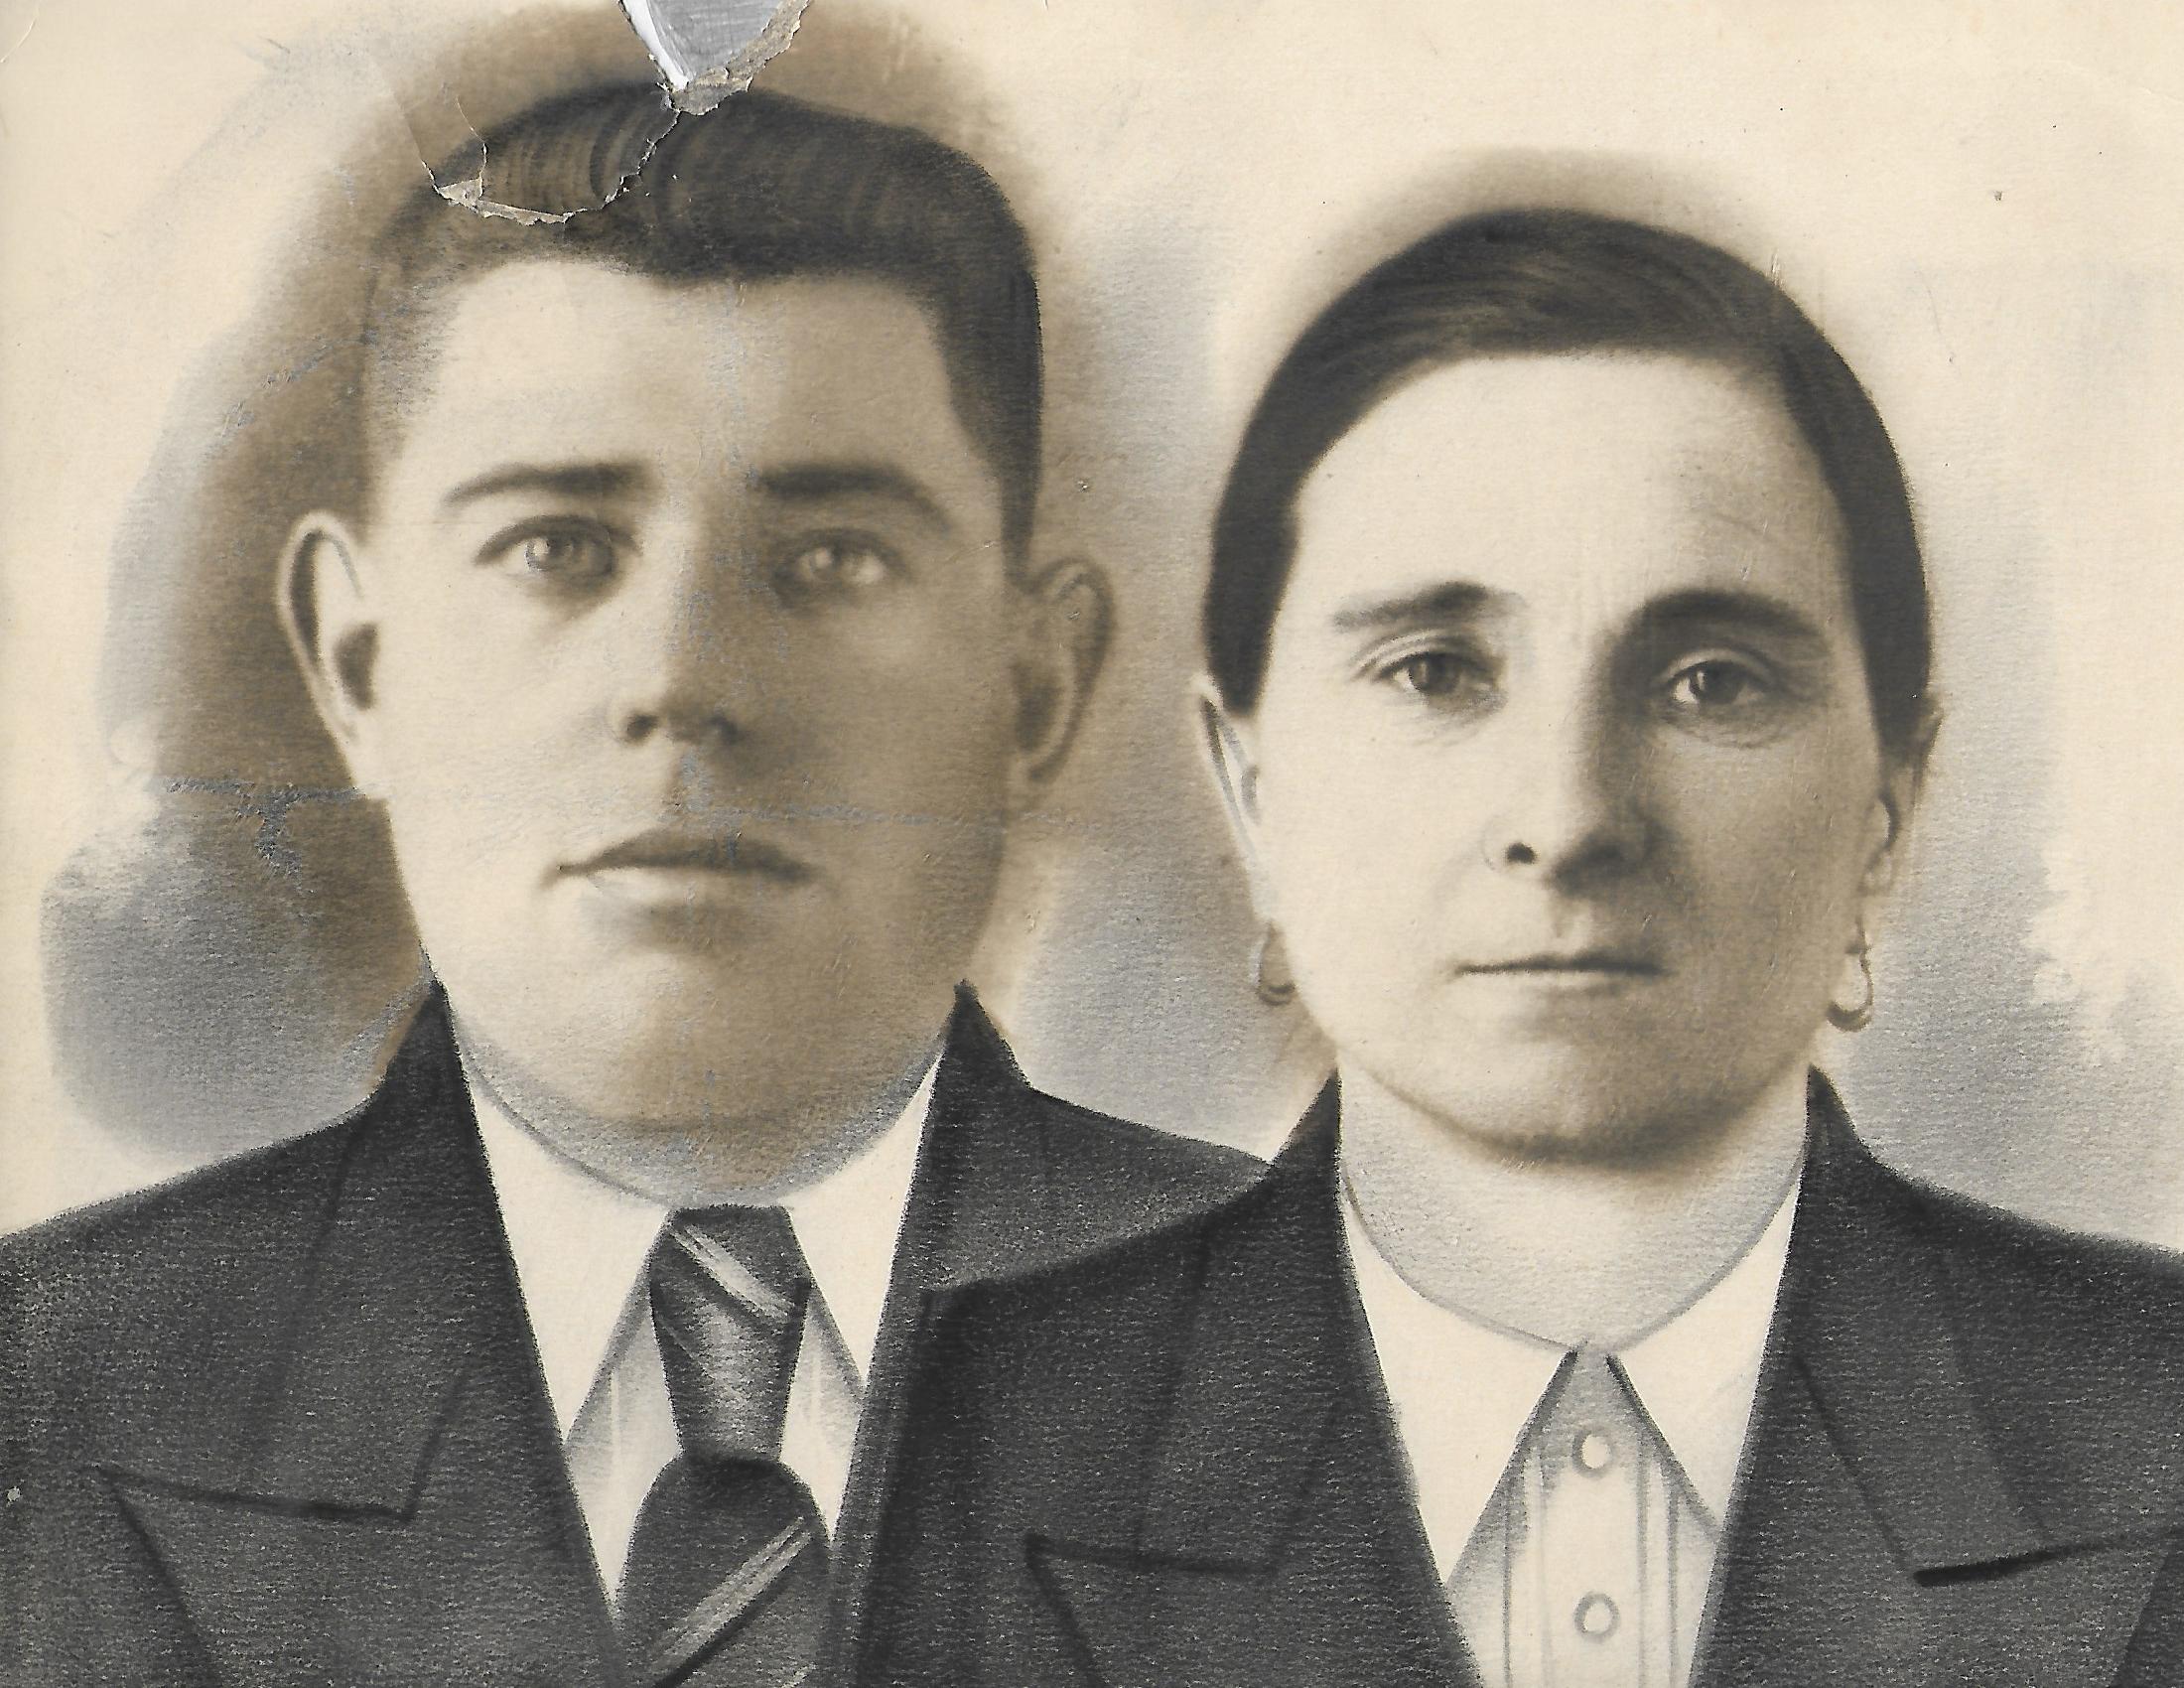 Kyrill Kasyanov and his wife Varvara. This is the only existing photo of Kyrill, and was taken for the couple's wedding in 1935. / Courtesy Jerry Morelock